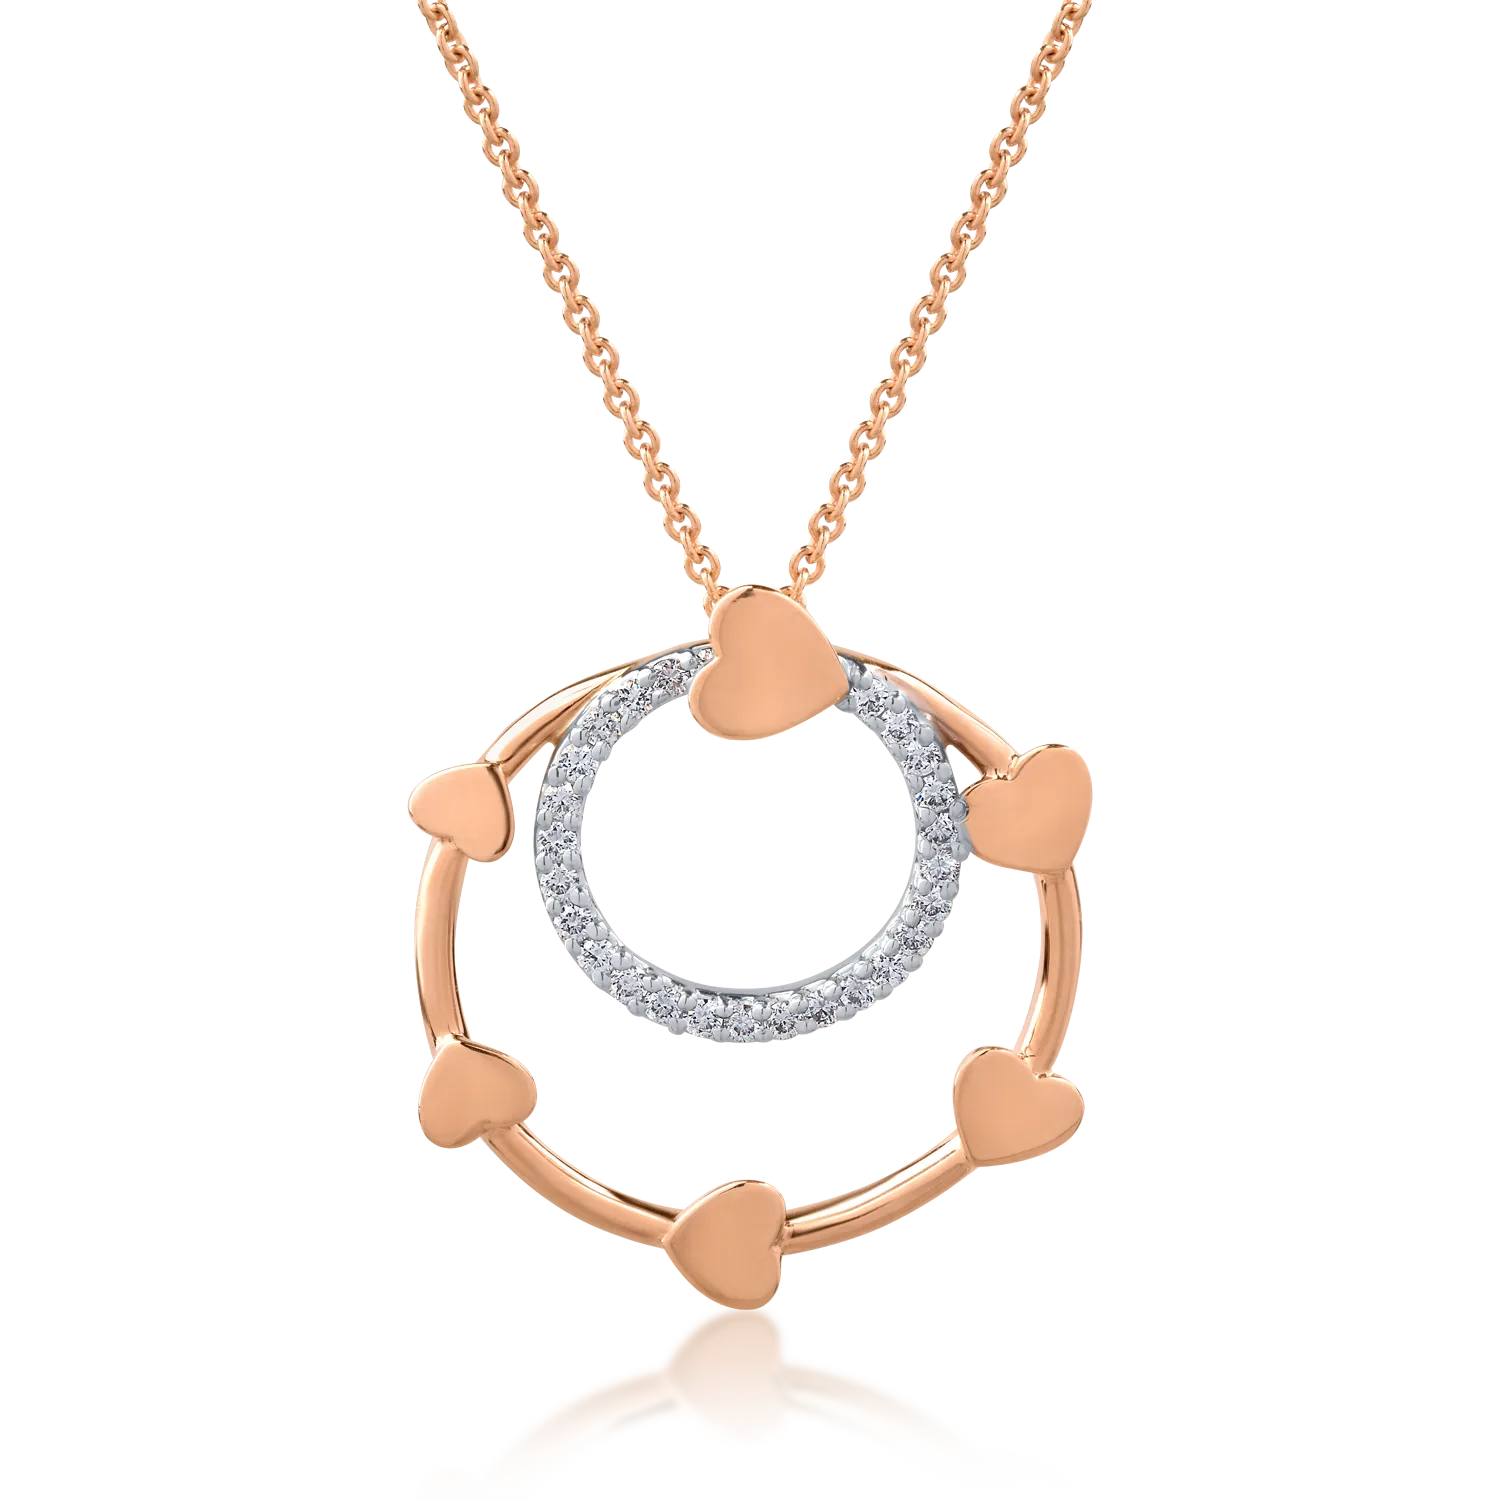 18K white-rose gold pendant necklace with 0.2ct diamonds